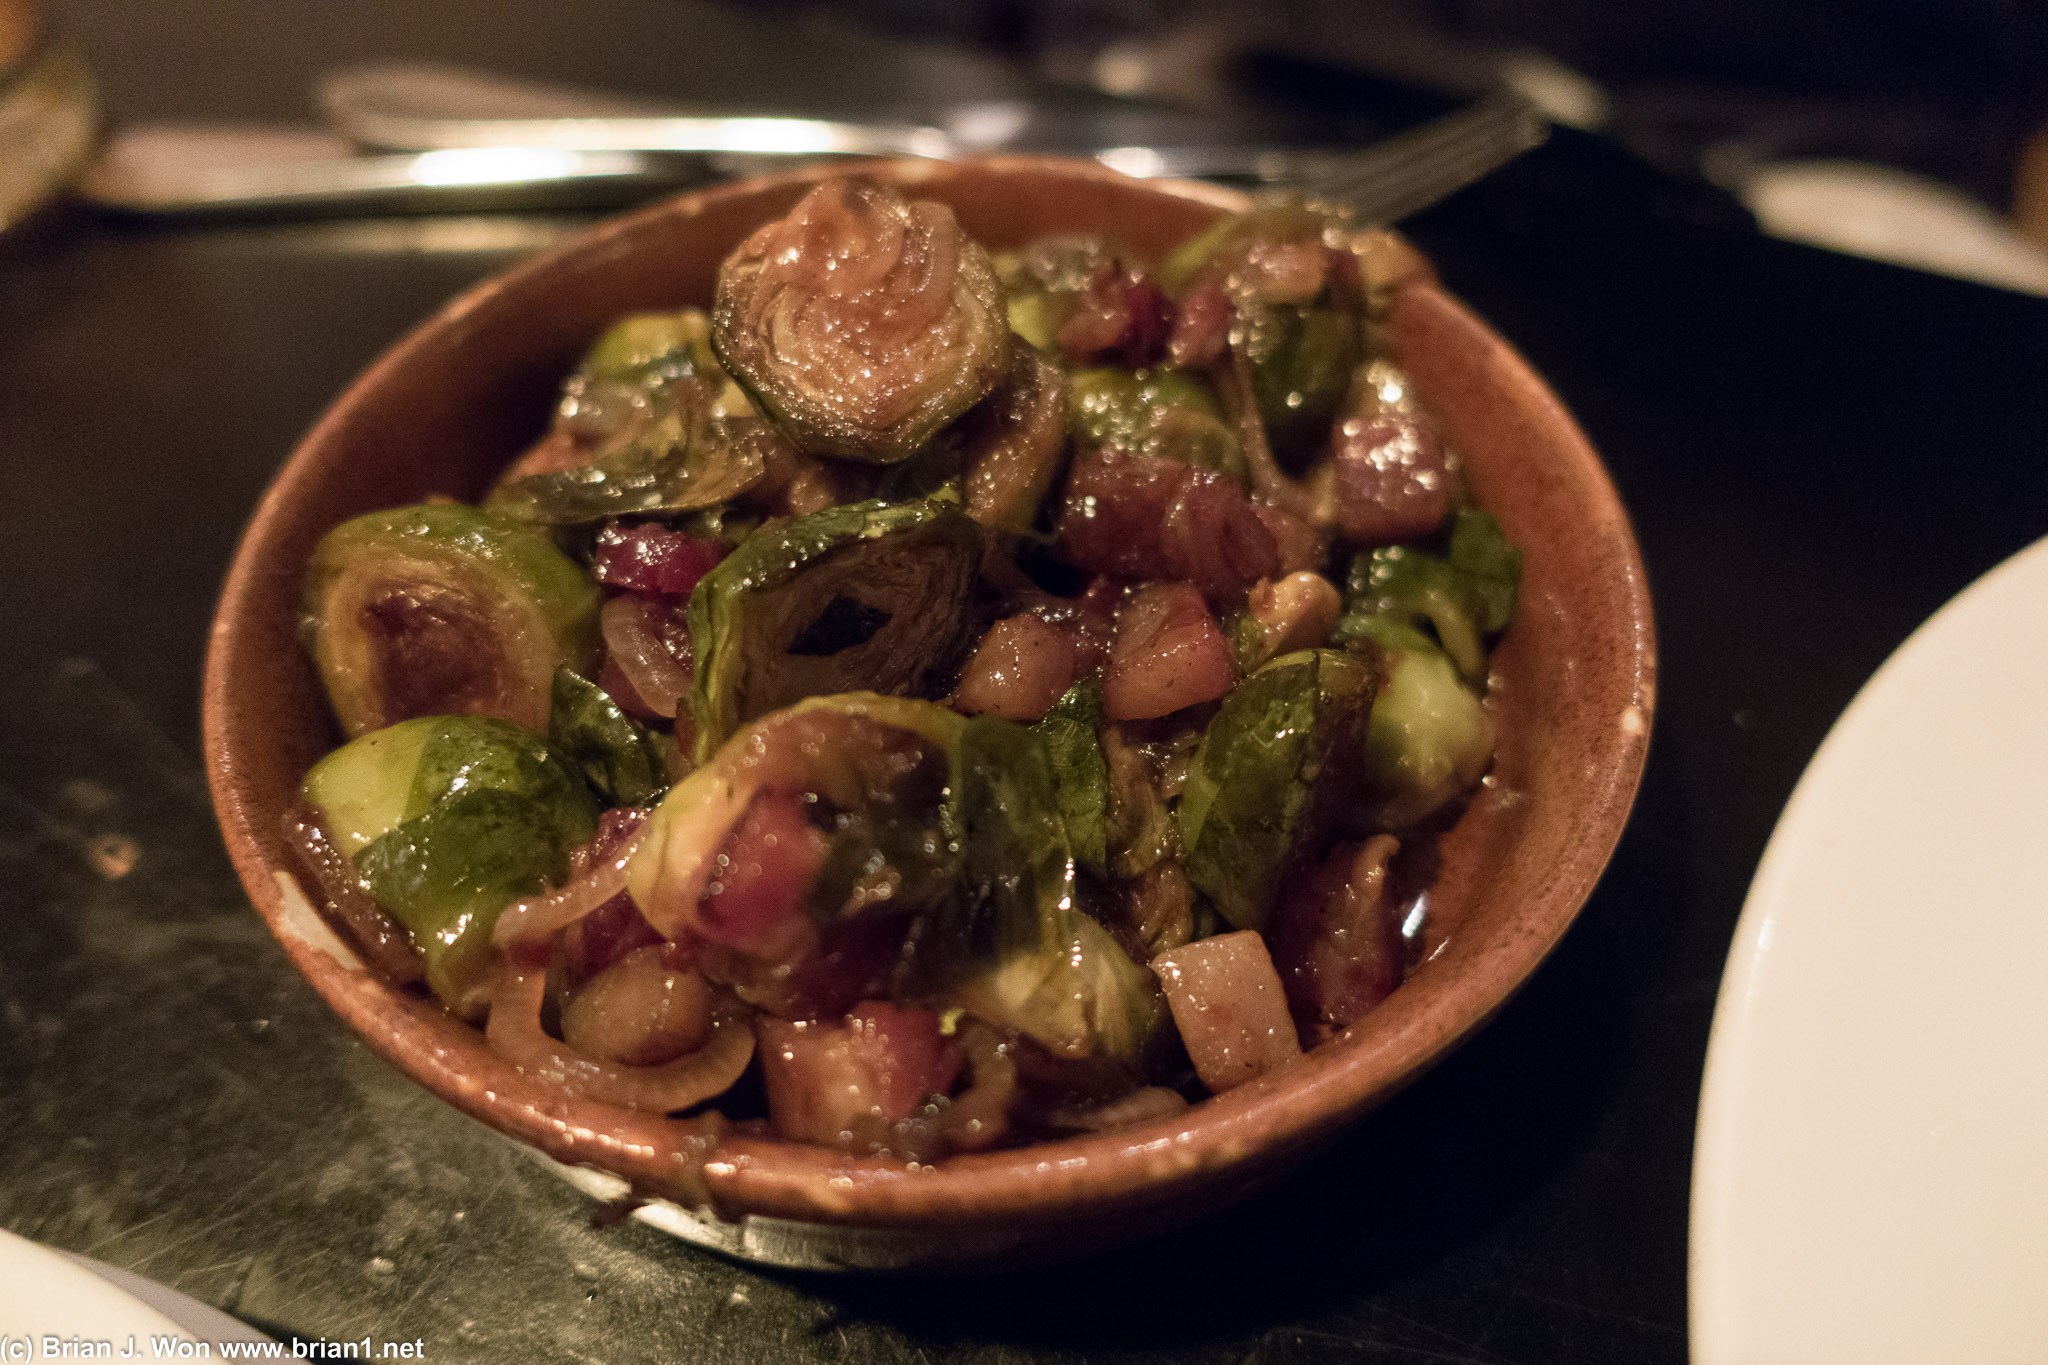 Brussel sprouts and bacon. A little heavy on the sauce but very good otherwise.